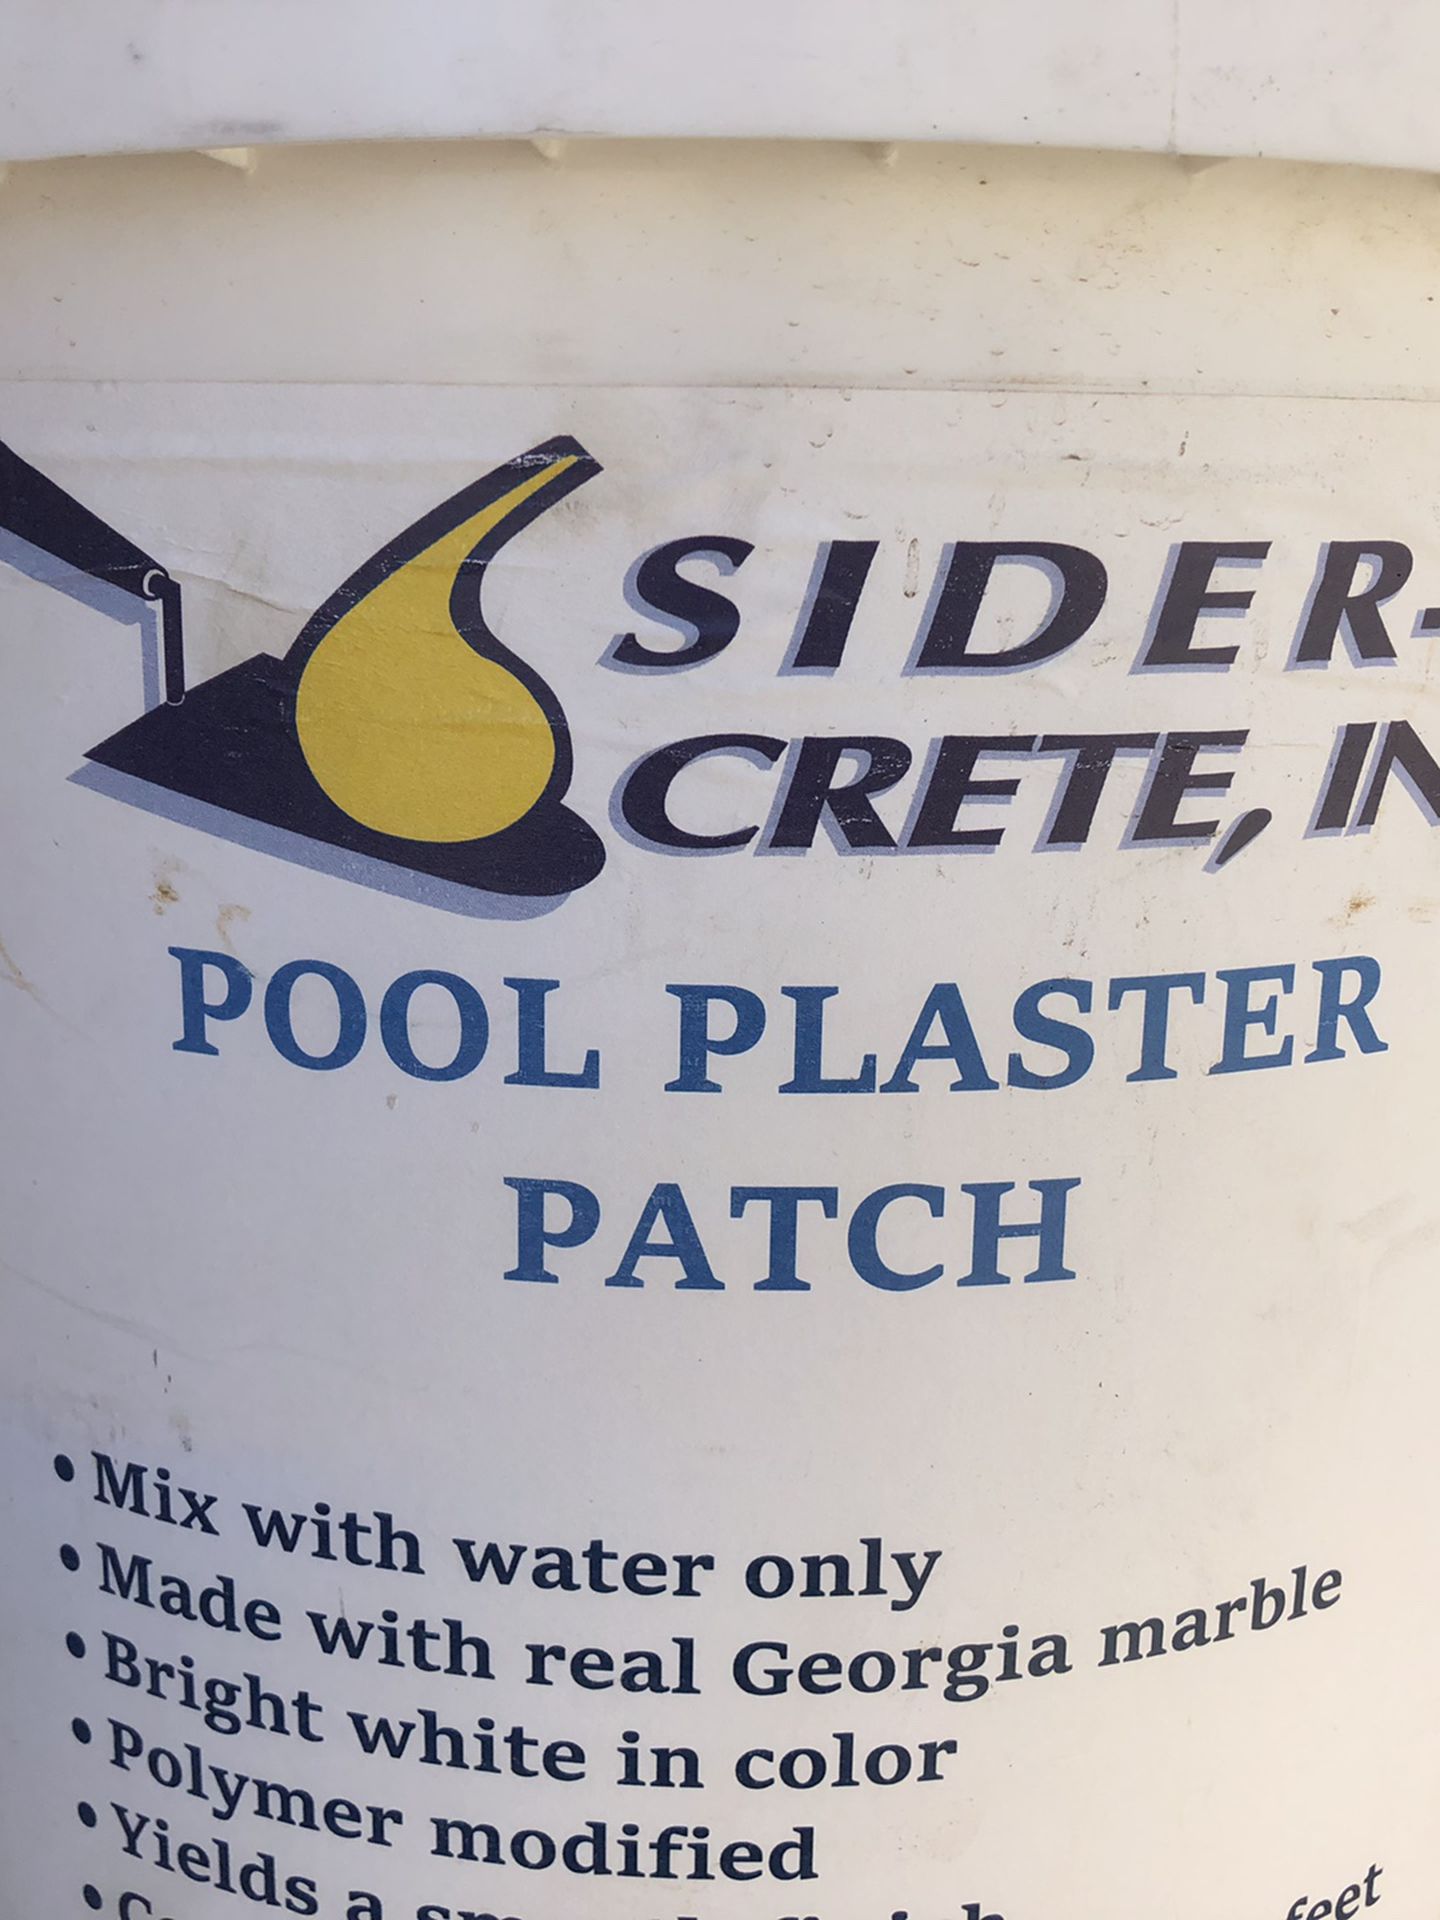 Pool plaster patch